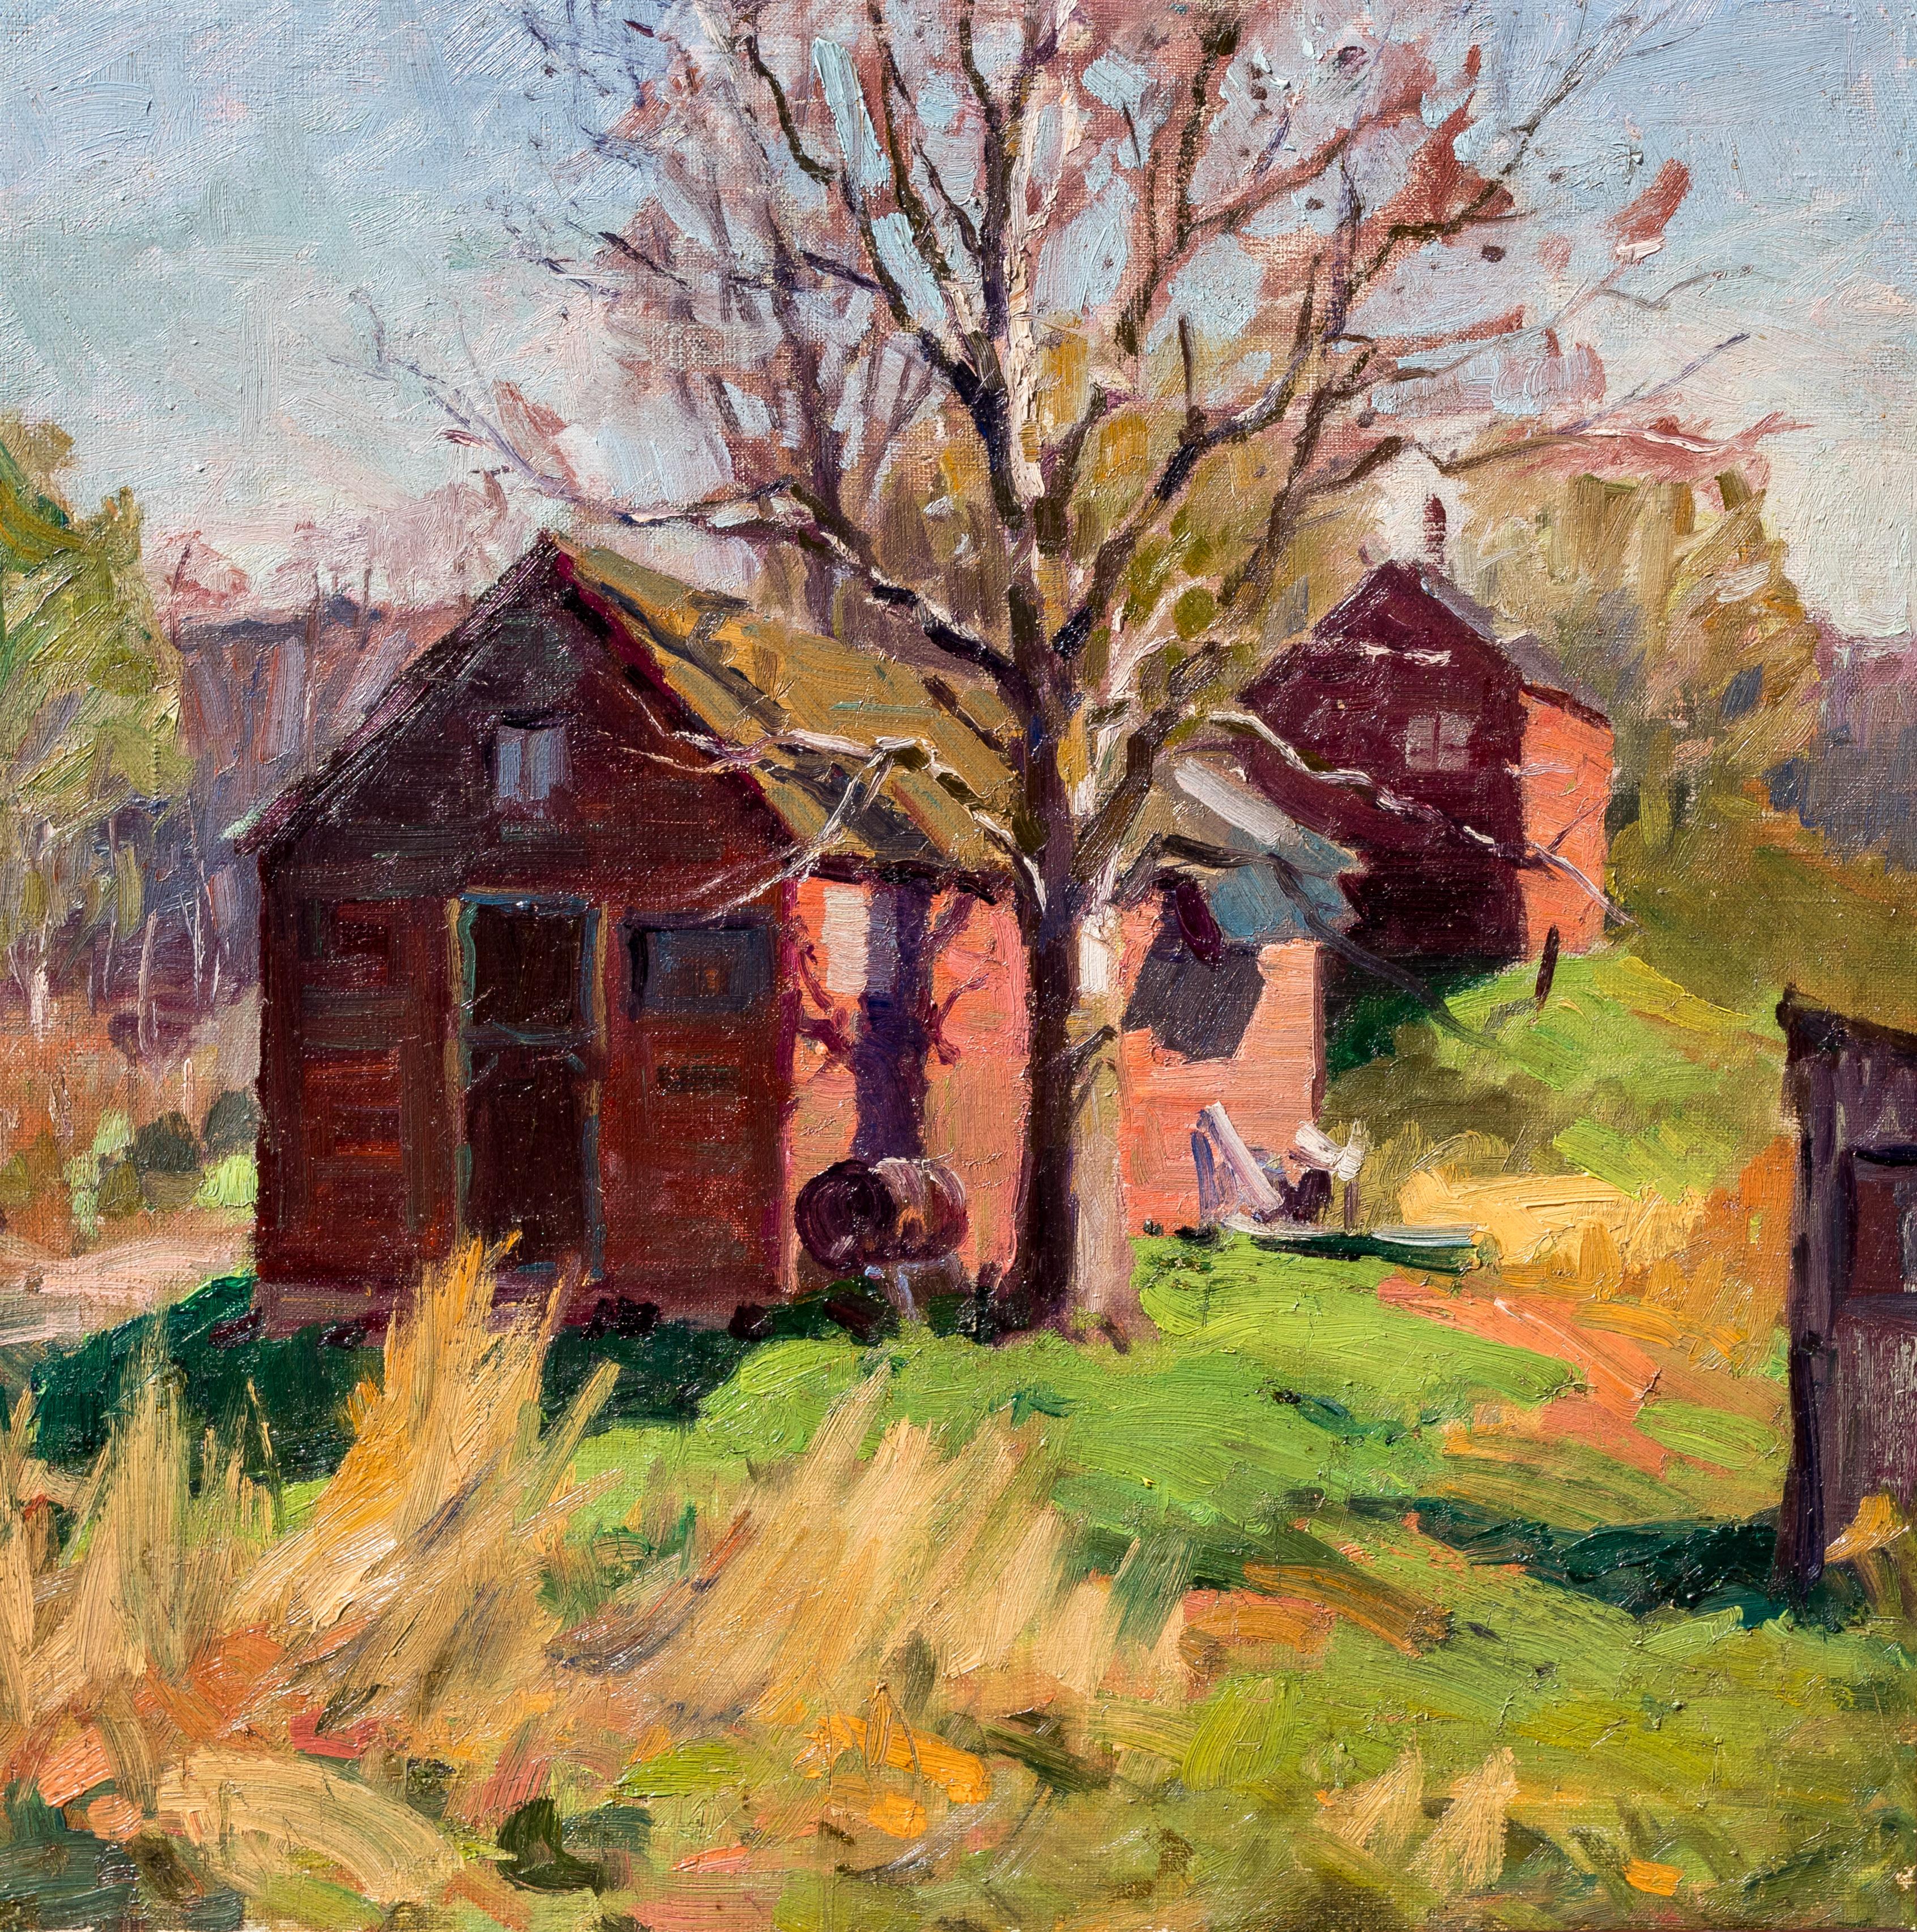 This striking sunlit vintage American Impressionist landscape painting titled "Summer Cottages"( Circa 1925), harkens strongly to Pennsylvania Impressionism. It features vibrant painterly brushwork, beautiful color, and dramatic light with a lovely